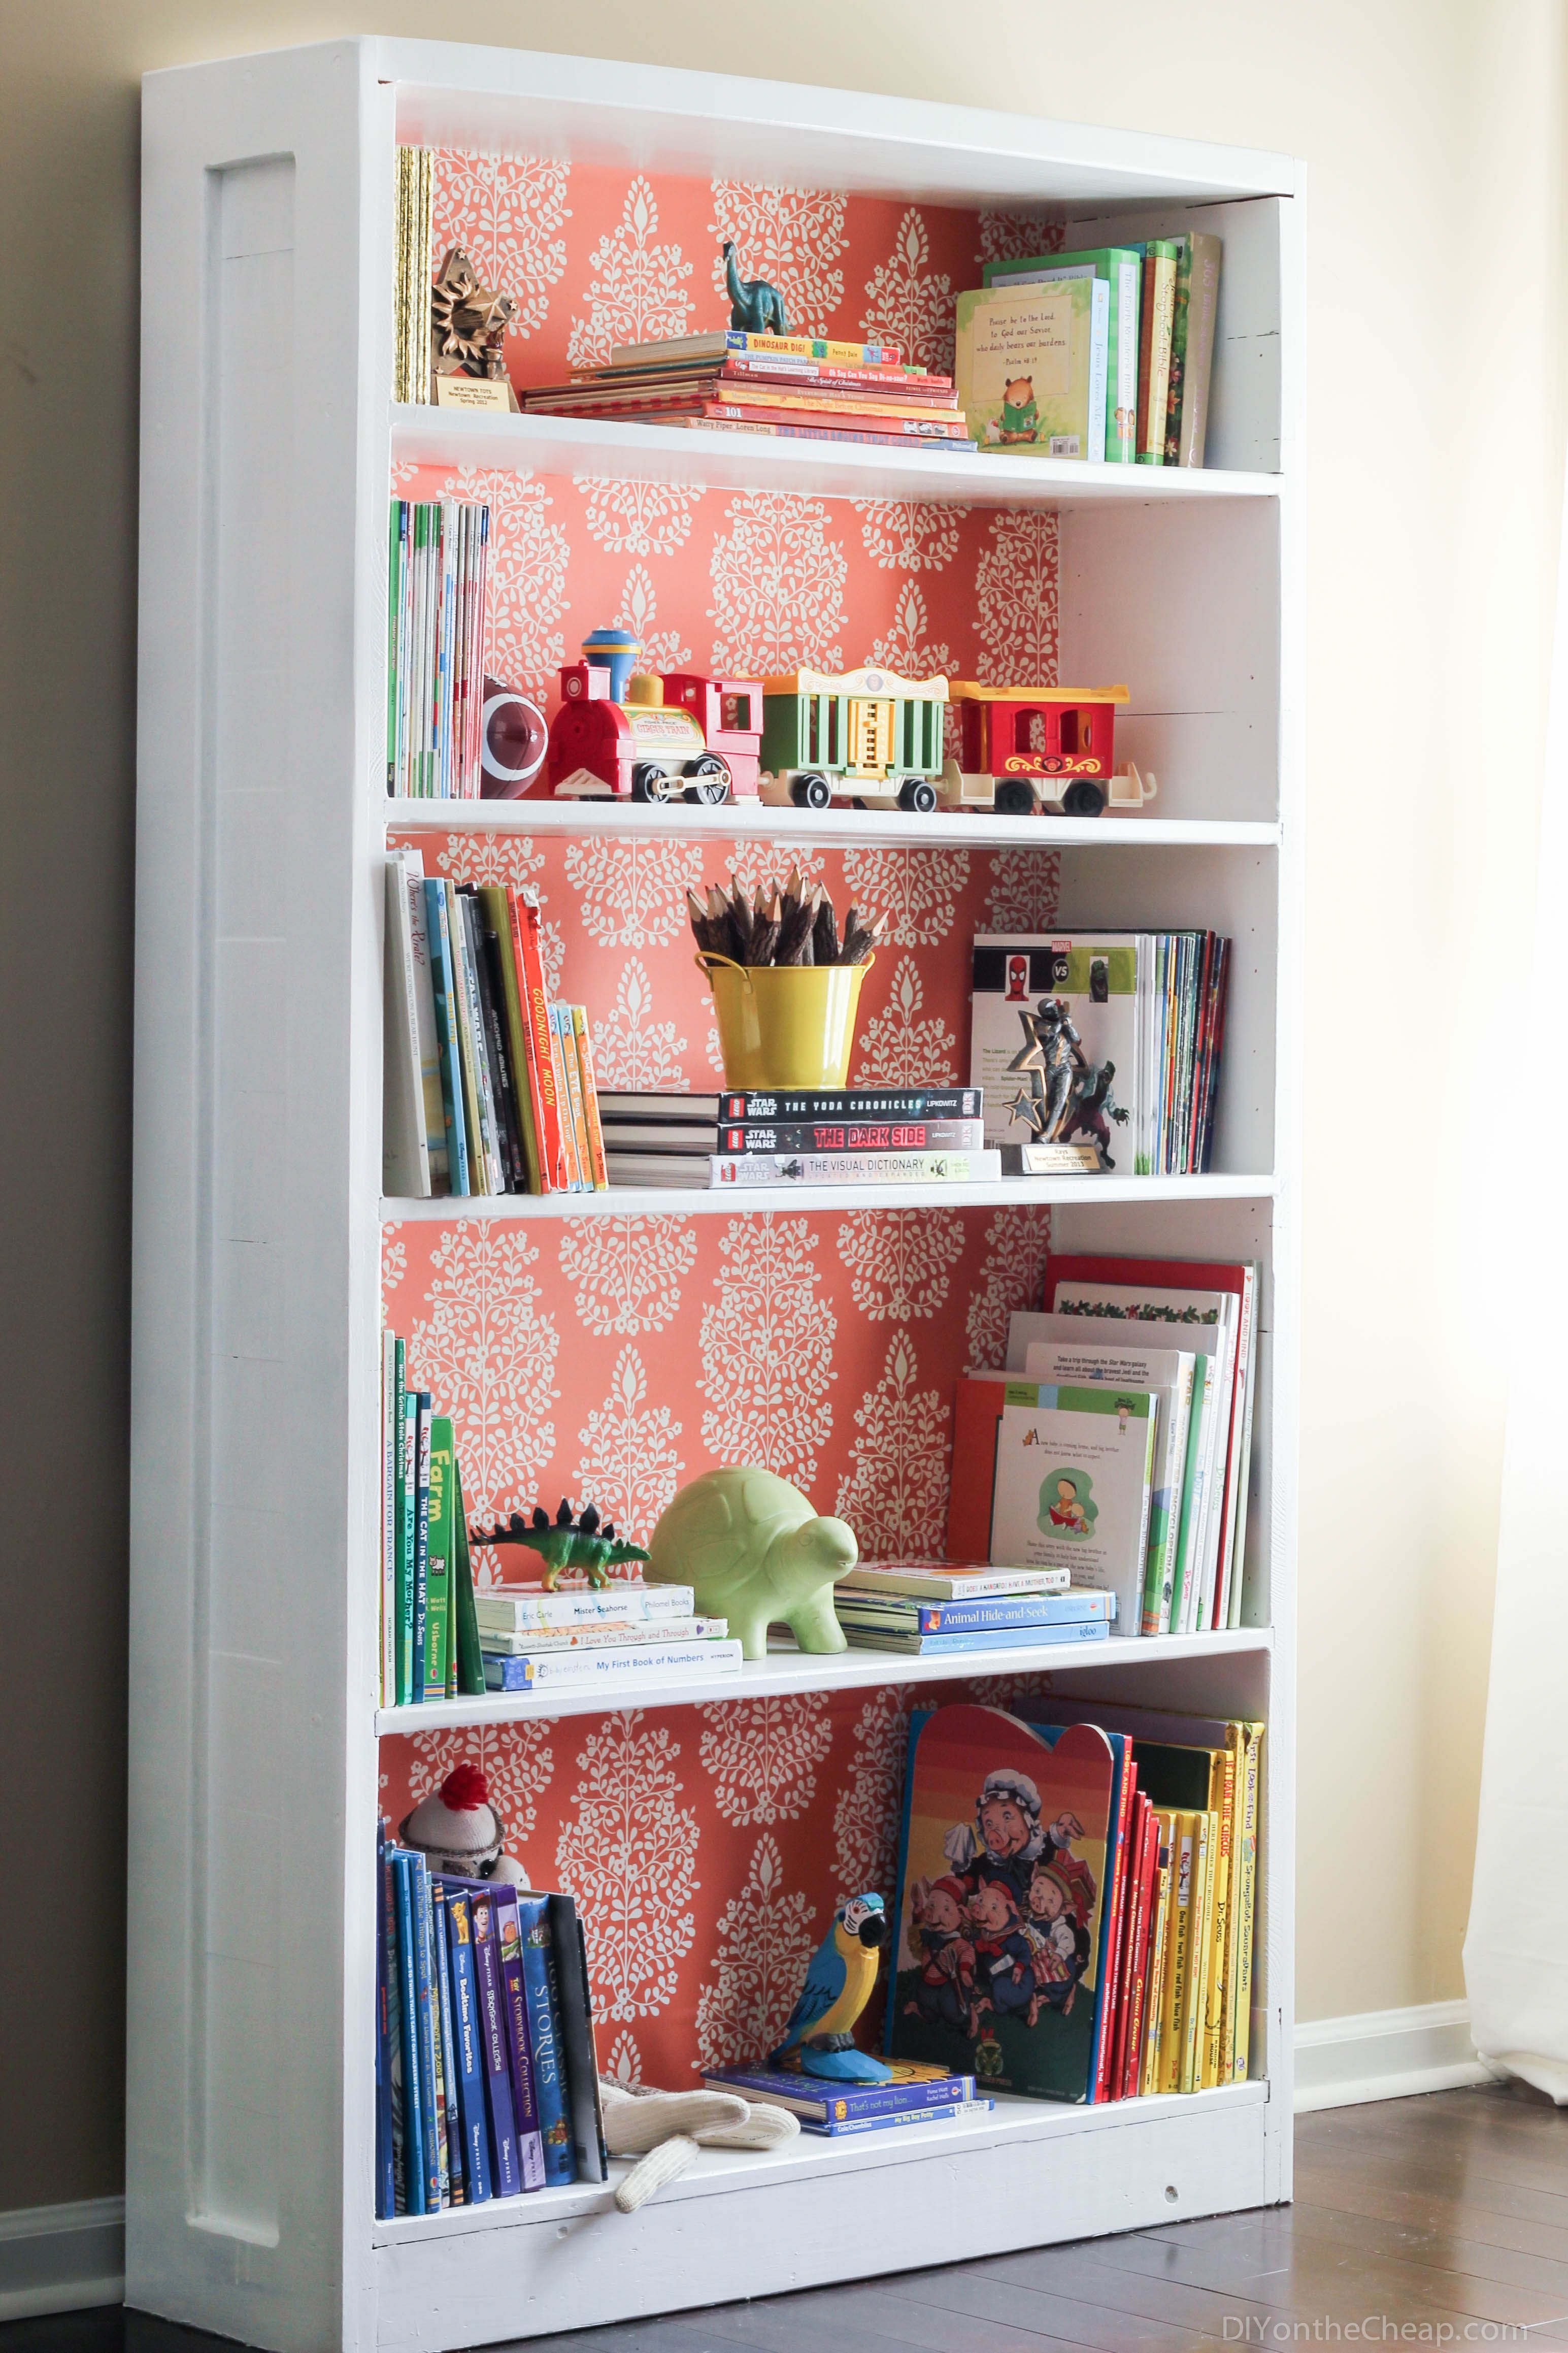 Awesome (and easy!) bookshelf makeover using paint and removable